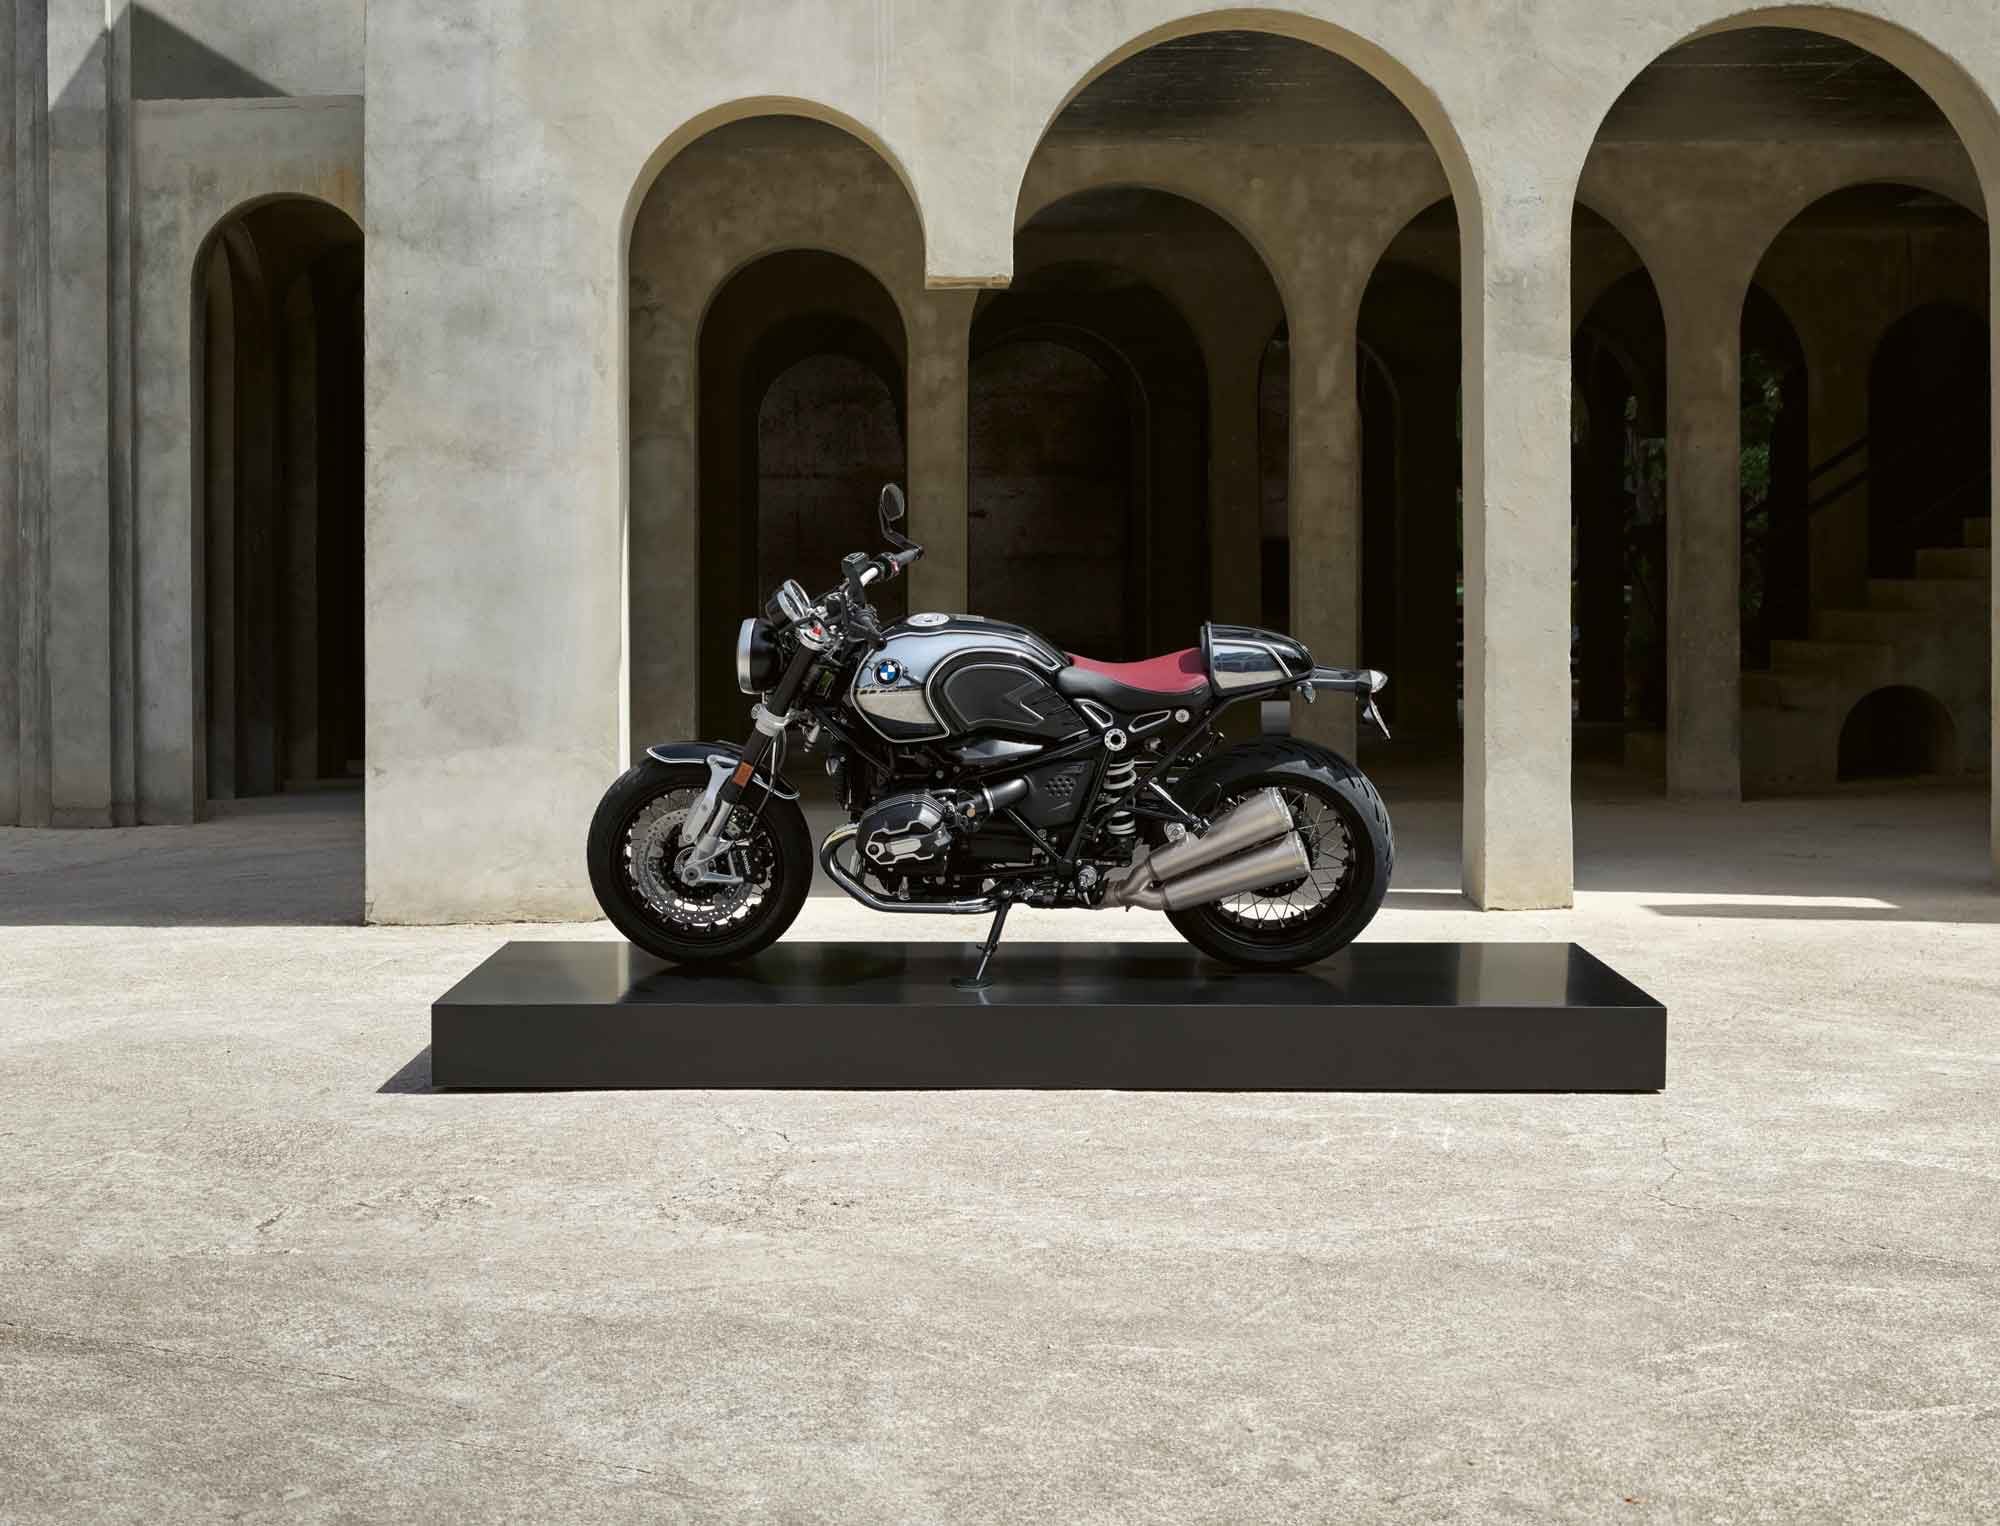 Oxblood seat adorns the R nineT 100 Year edition, same as the R 18 100 Year edition.